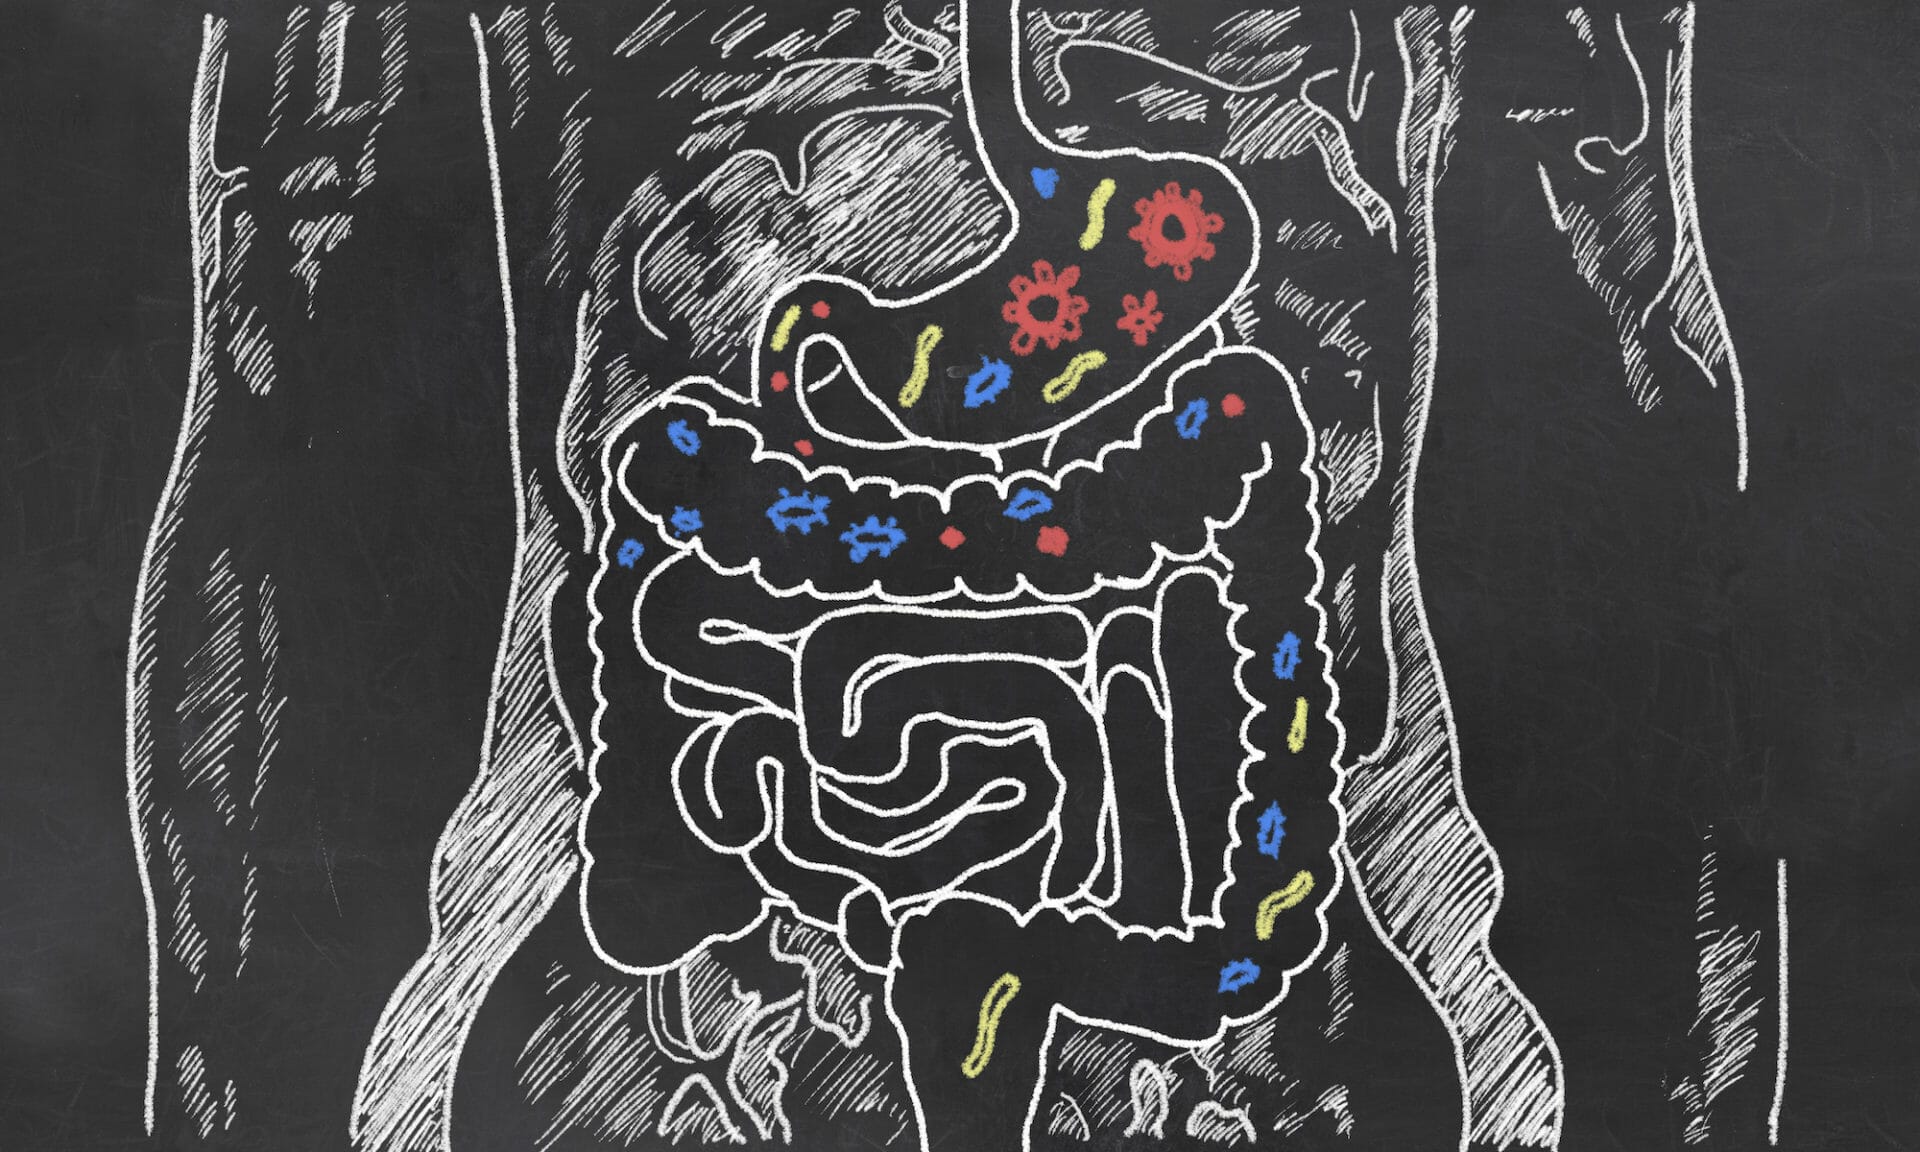 Microbiome - The Connection Between Diet, Disease, and Your Gut